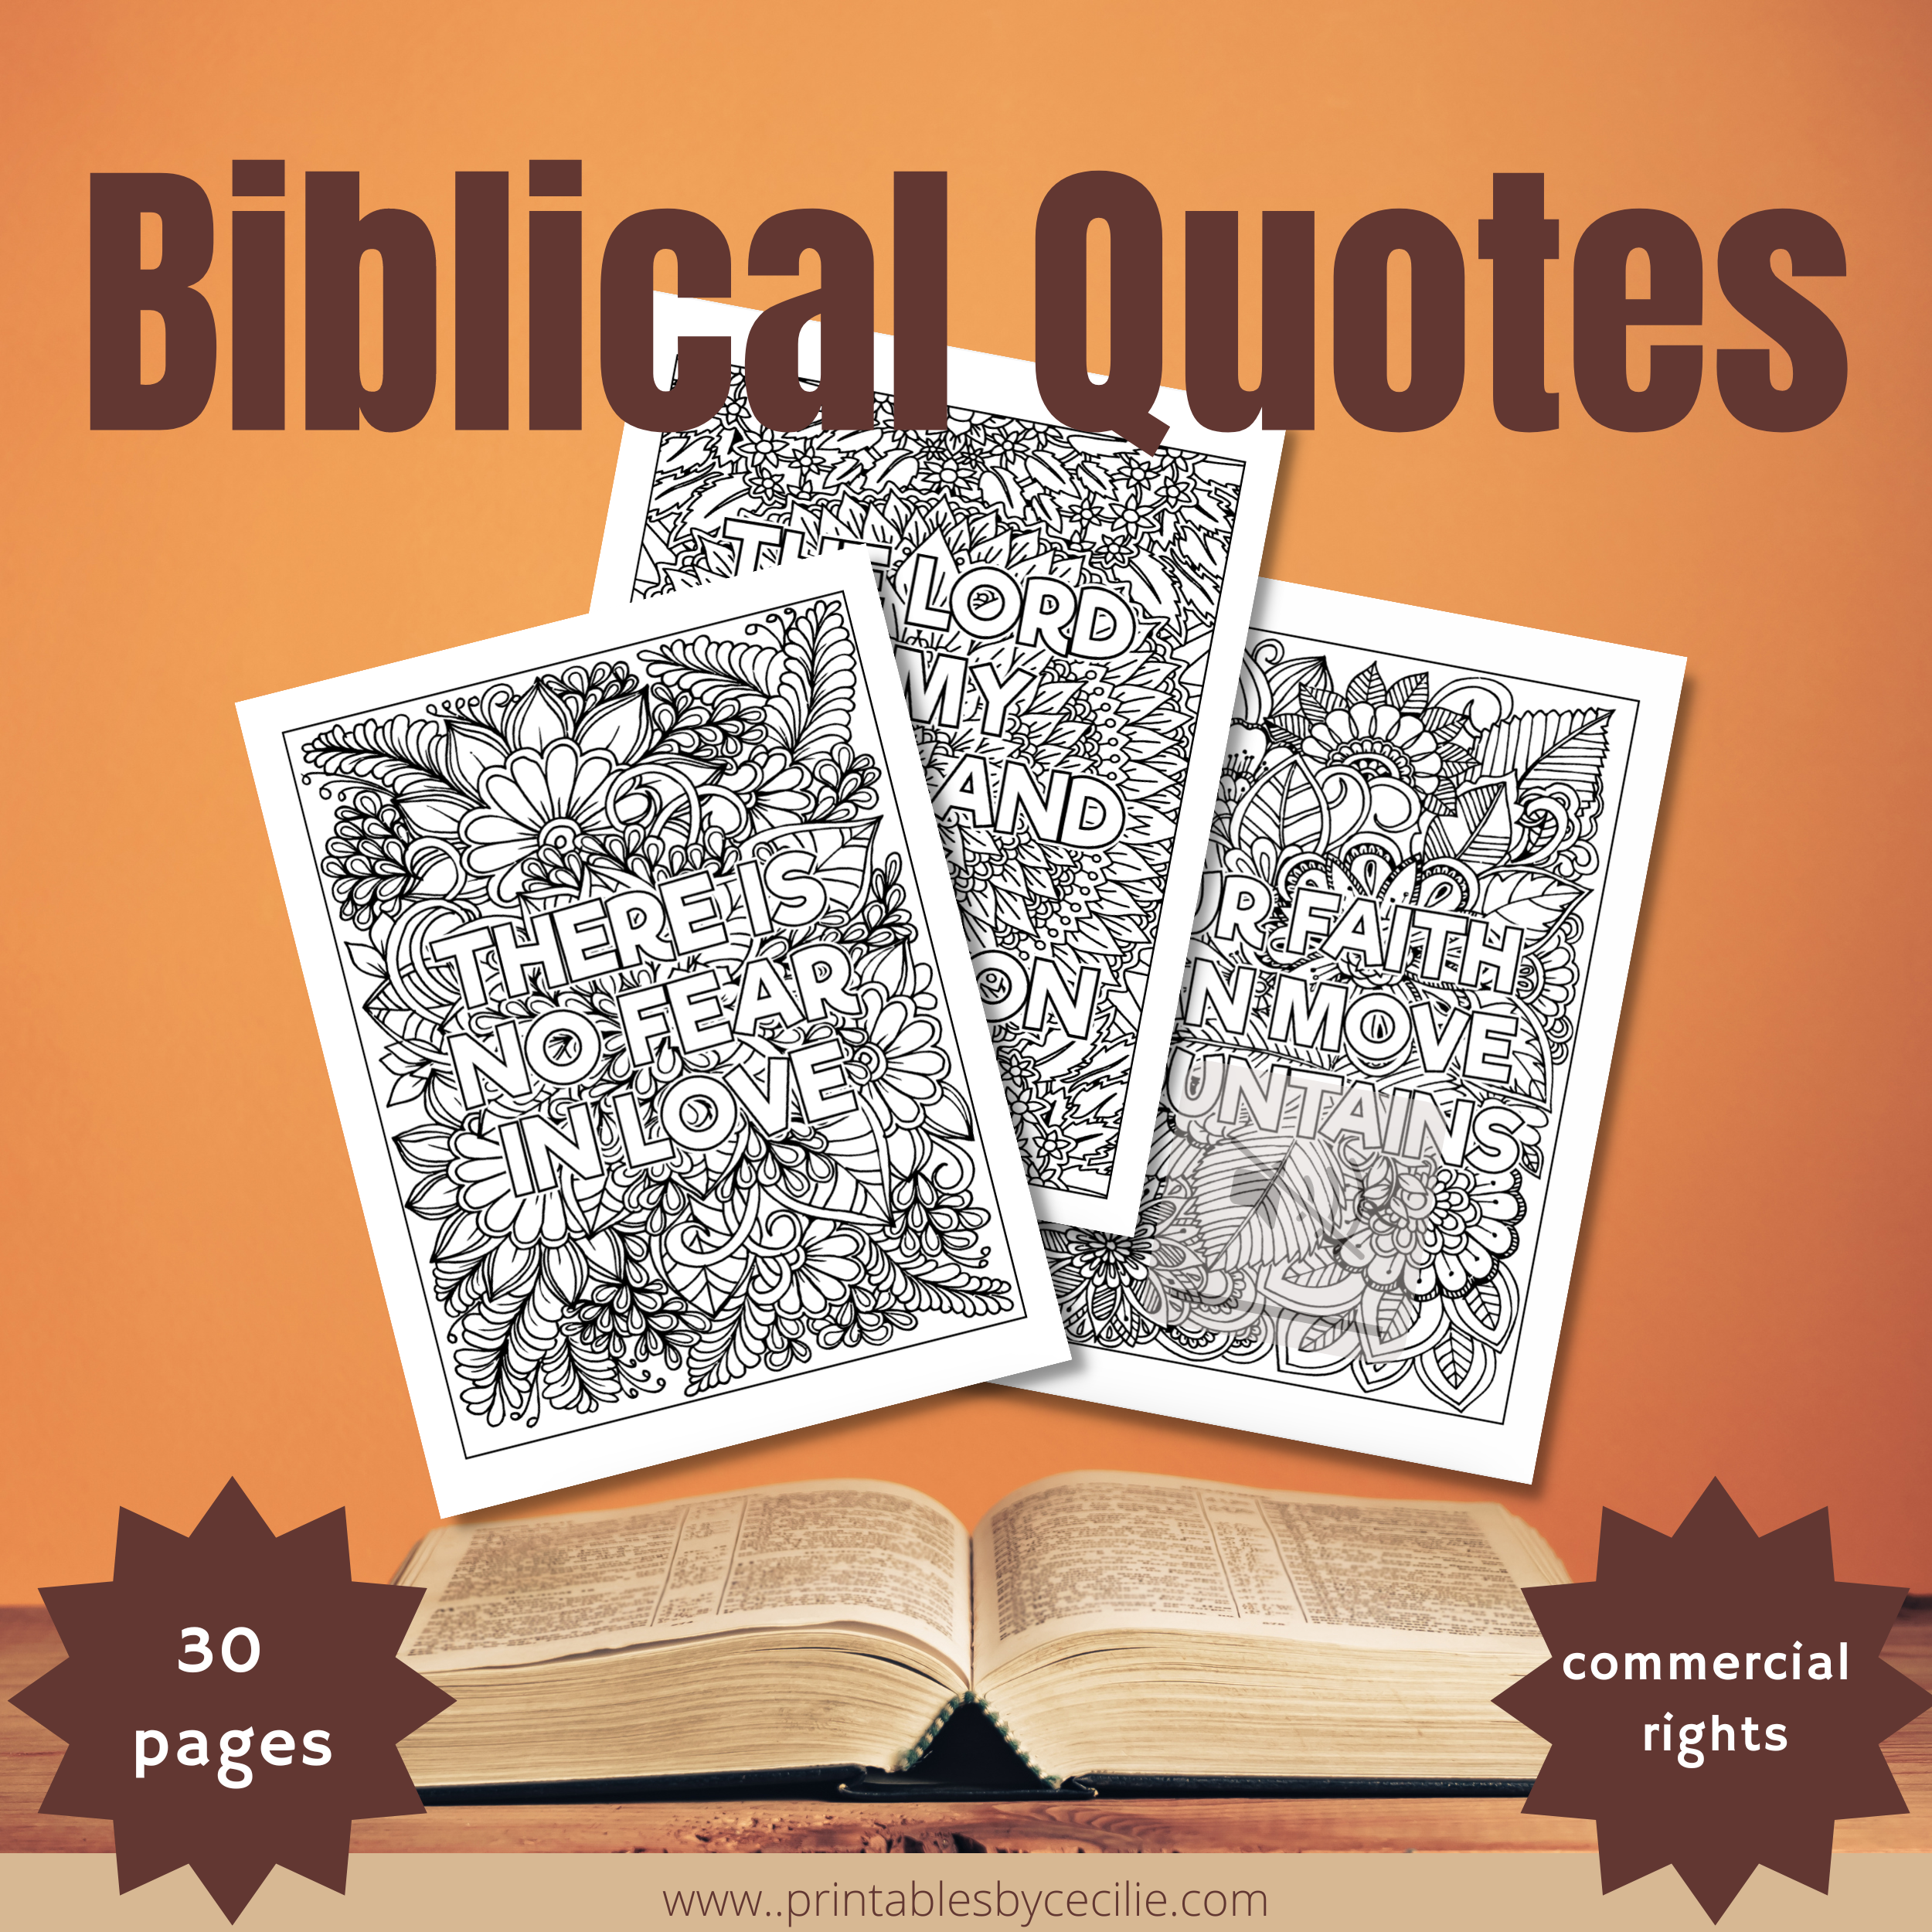 biblical quotes